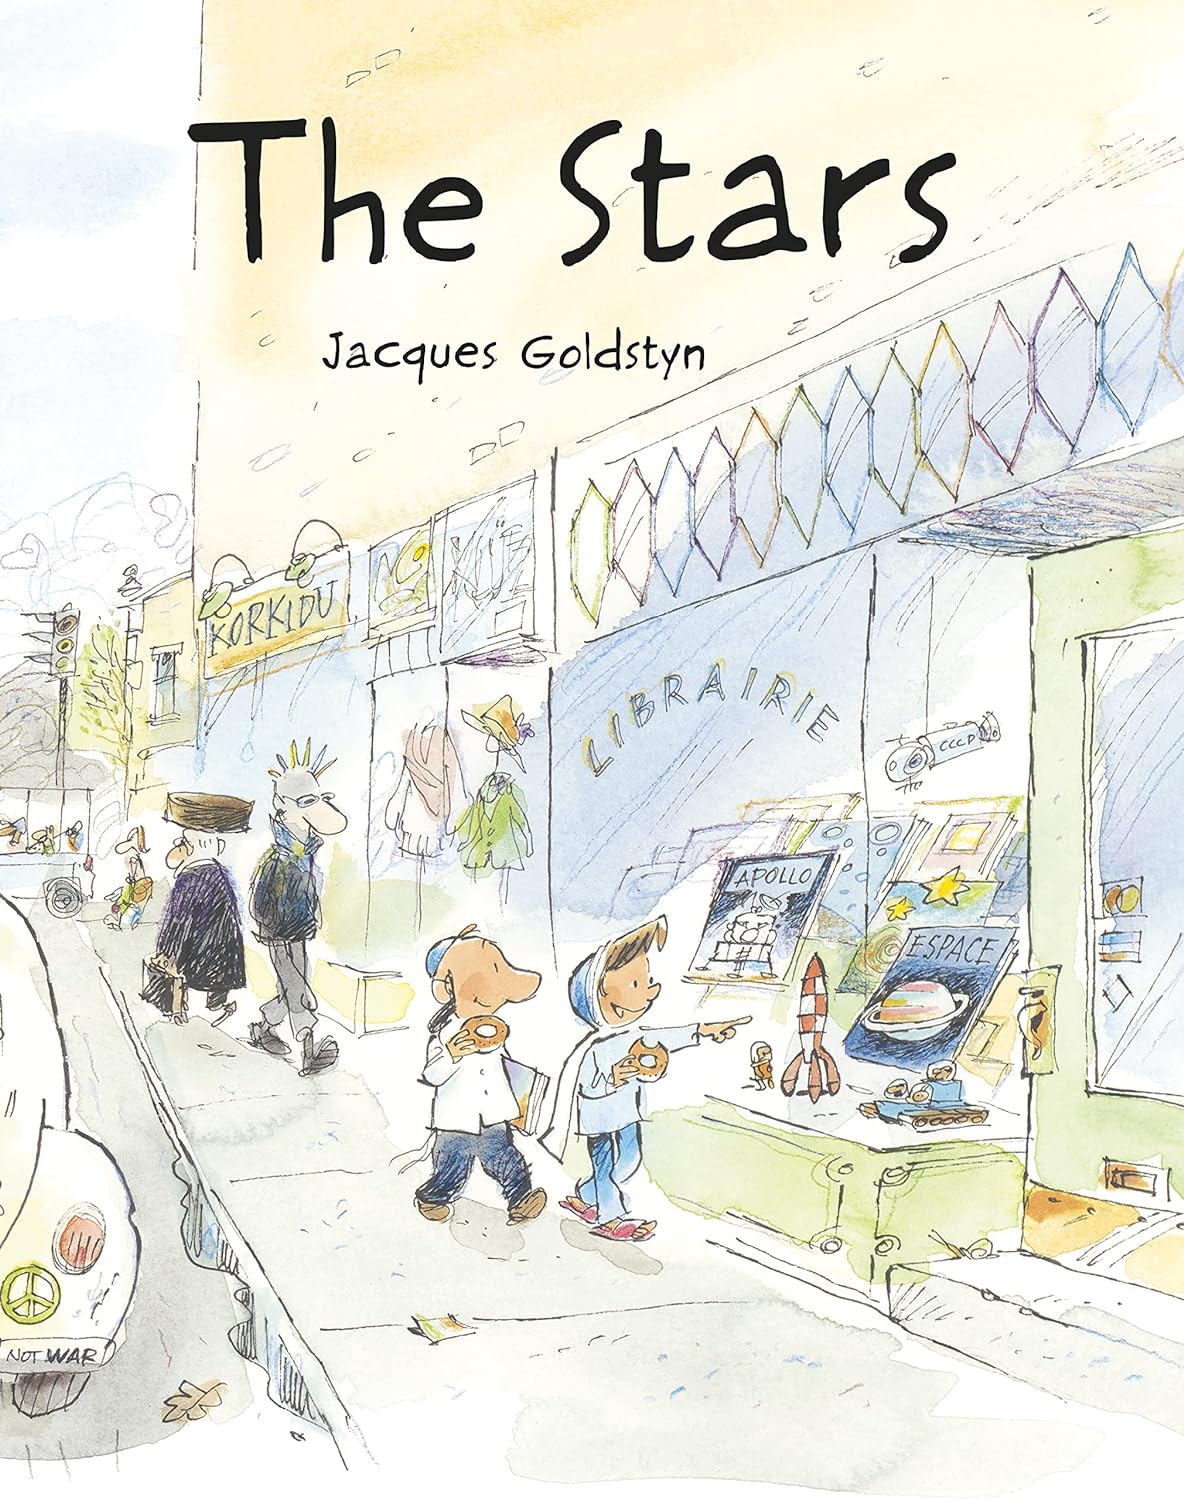 Jacques Goldstyn: The Stars